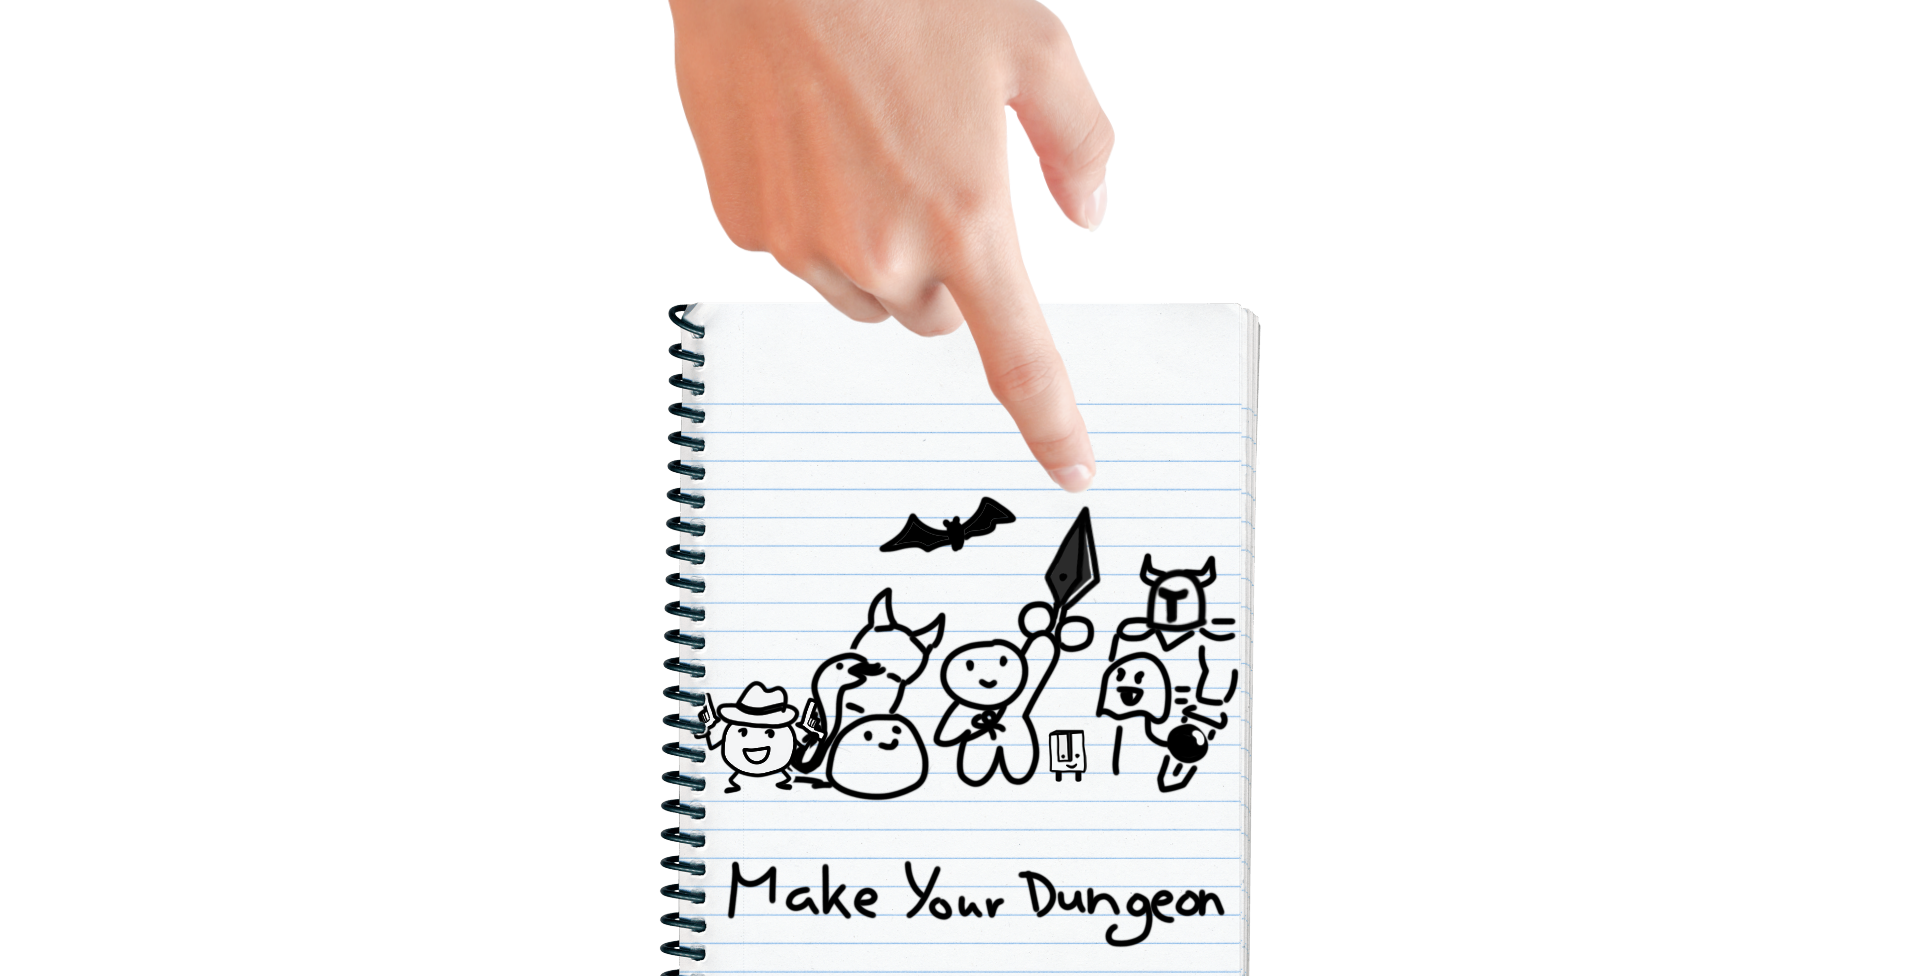 Make Your Dungeon